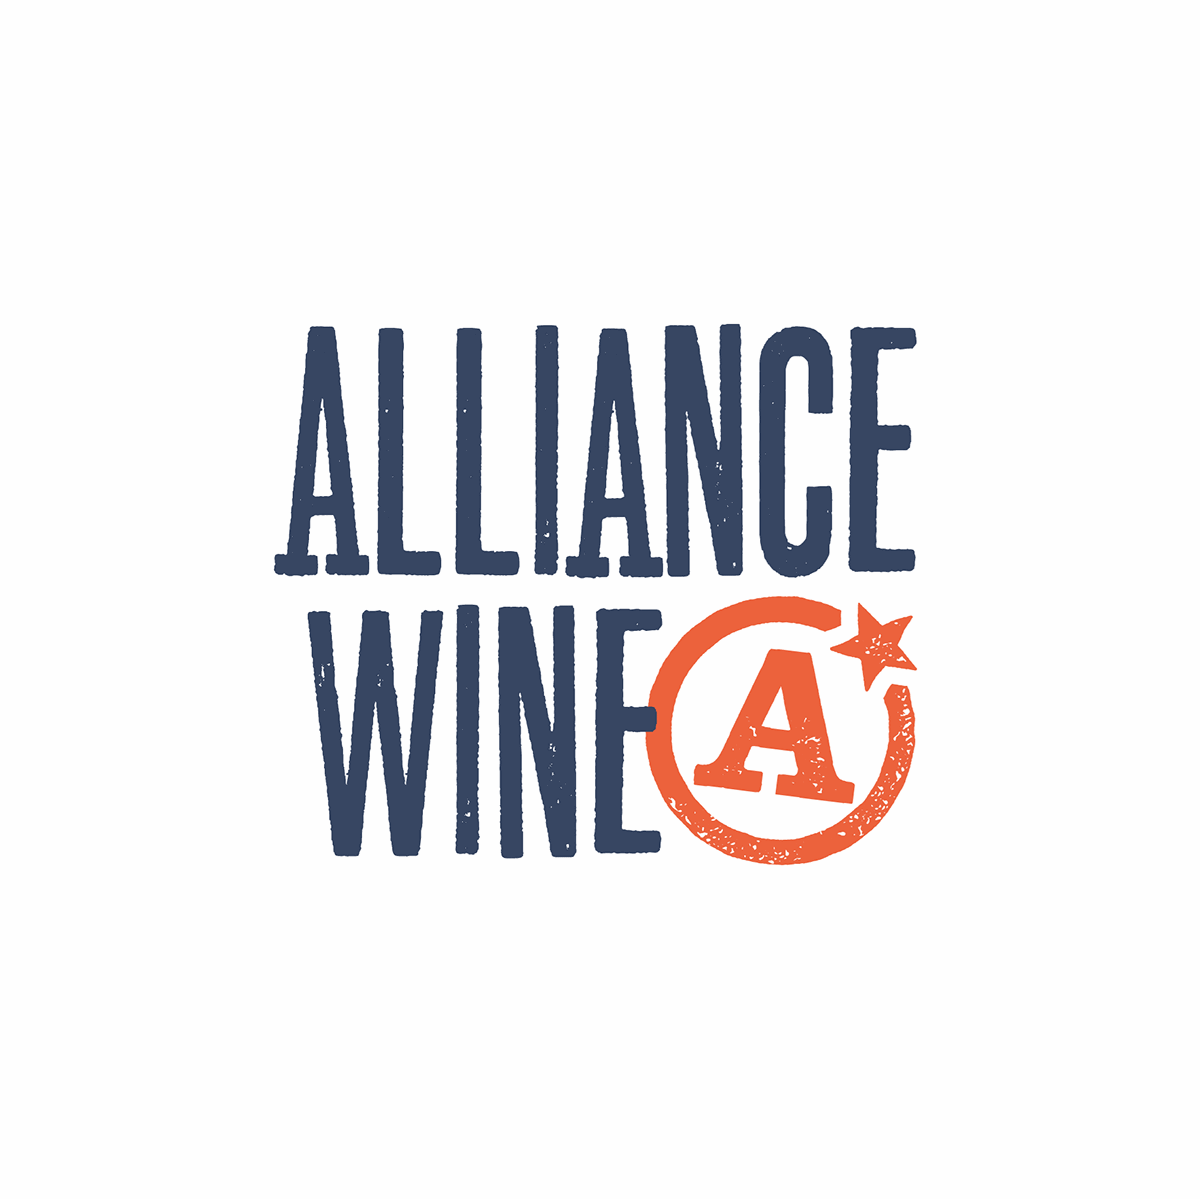 Our wines - Alliance Wine